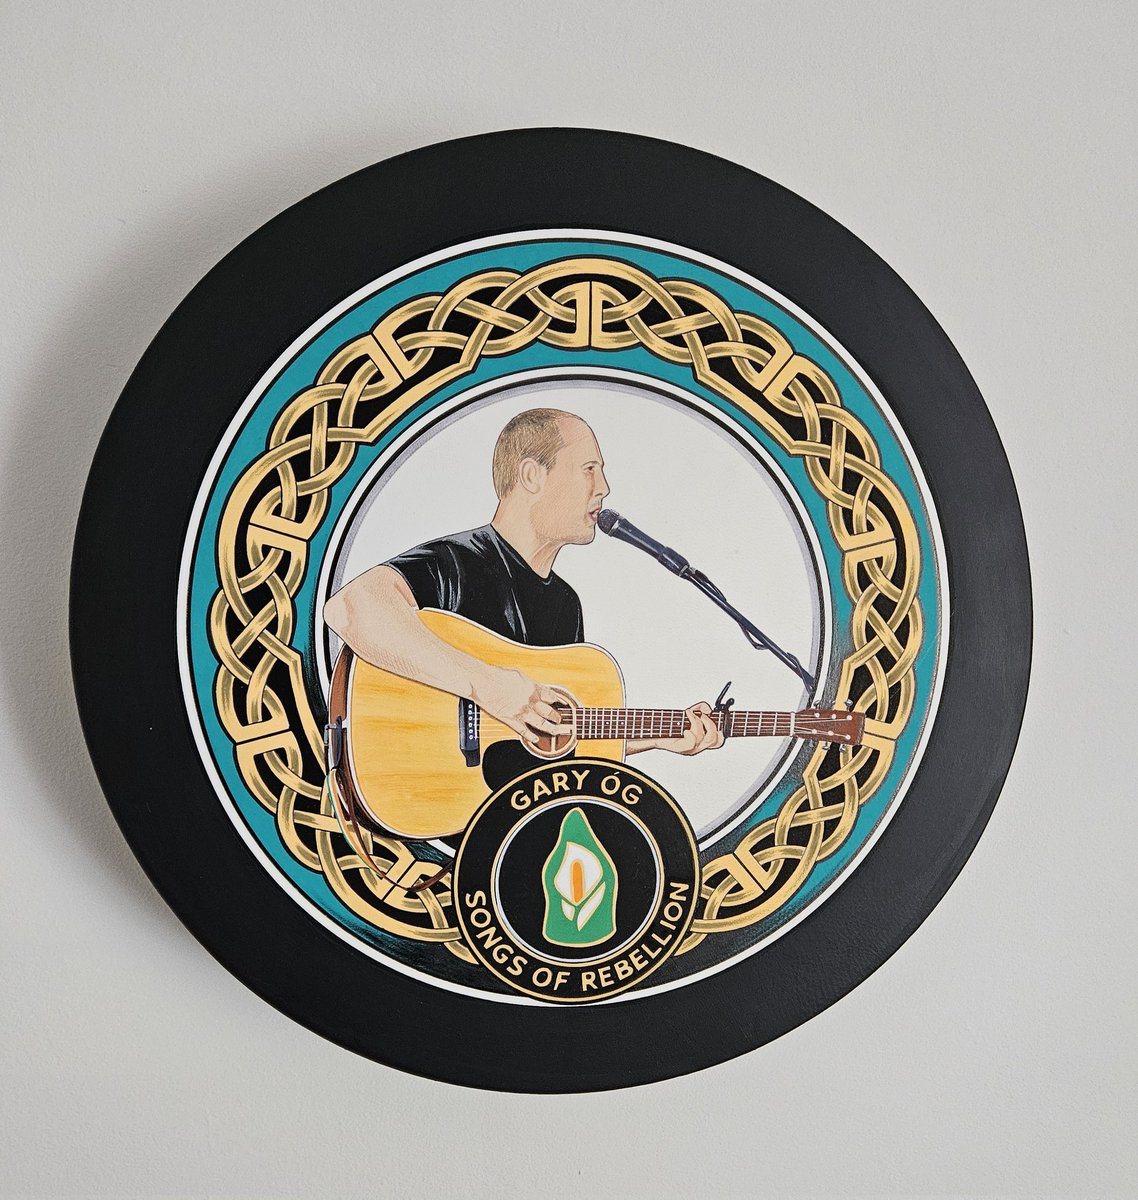 New Gary Óg bodhran. Photo sent in by a follower of the page. The fantastic work of barrys-bodhrans.com/designs